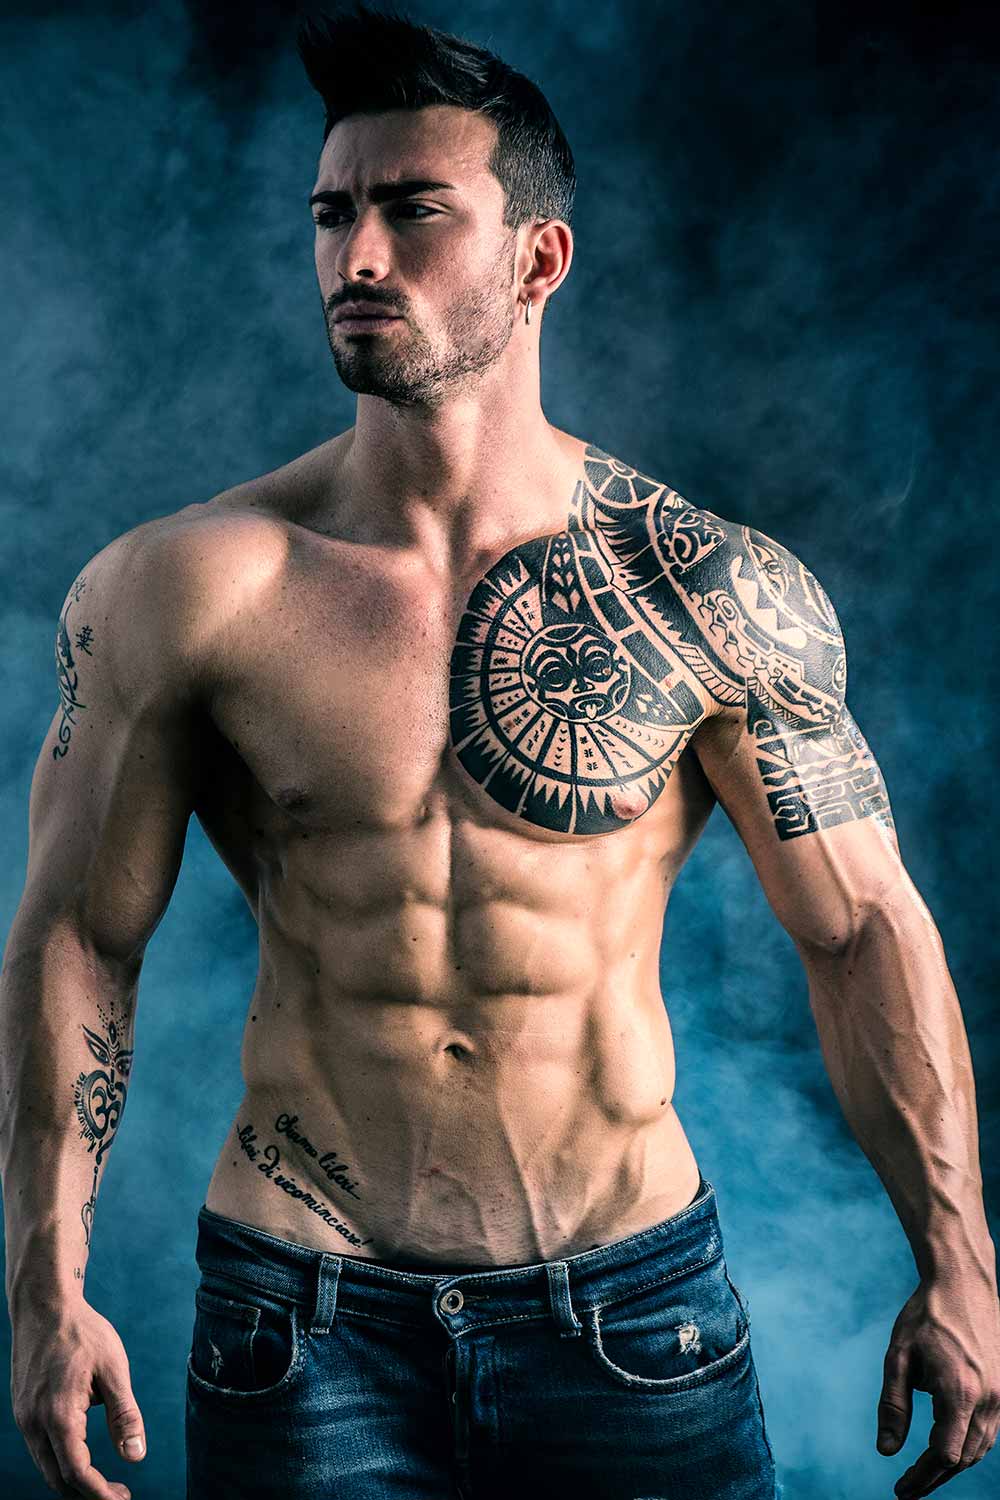 17 Best Small Chest Tattoos That Look Super Sexy